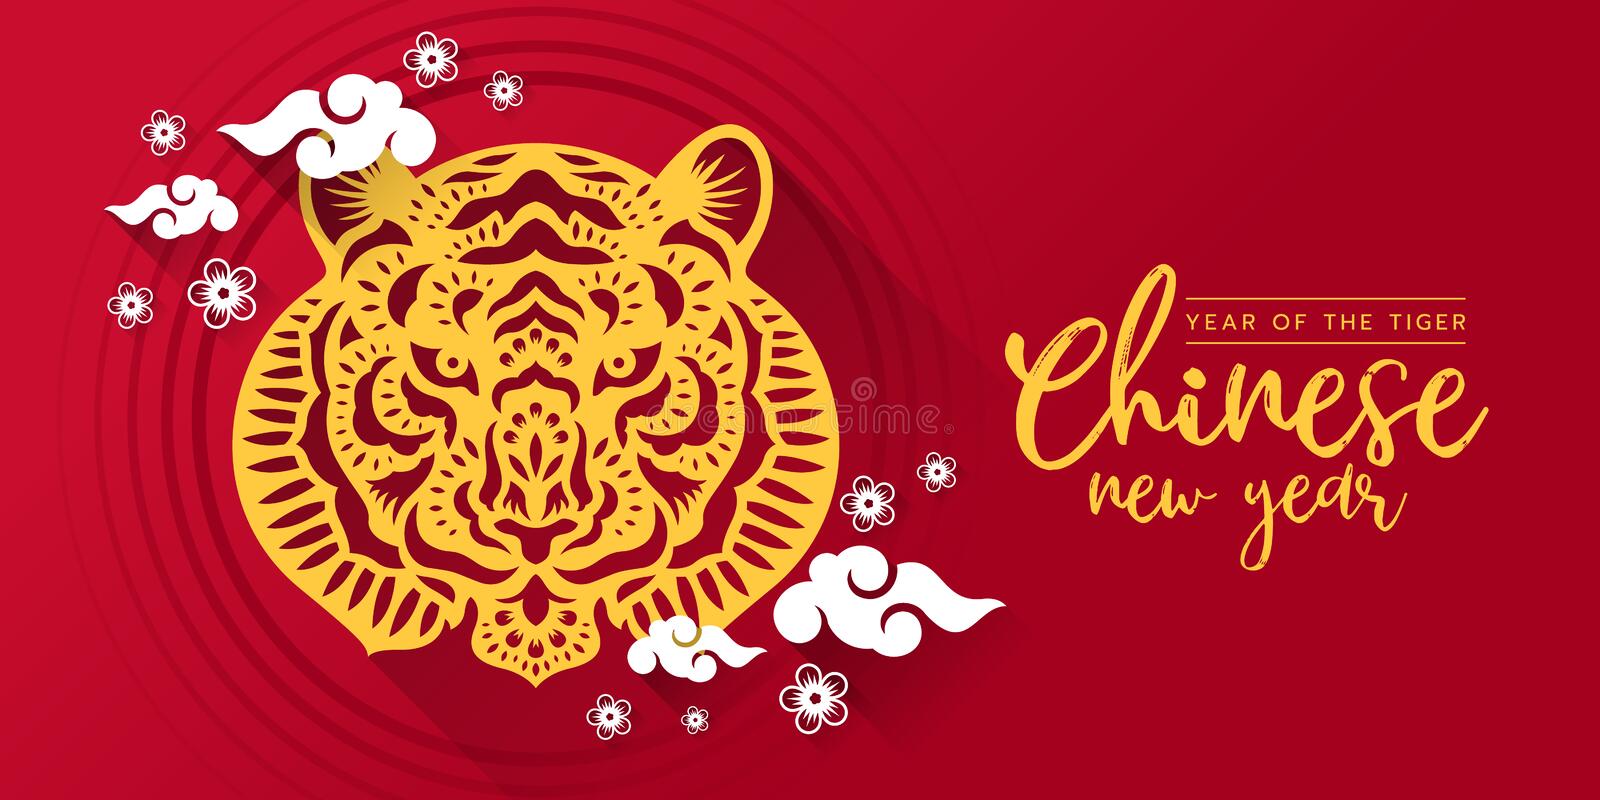 chinese-new-year-year-tiger-gold-paper-cutting-head-tiger-zodiac-sign-white-clude-flower-red-background-203095931